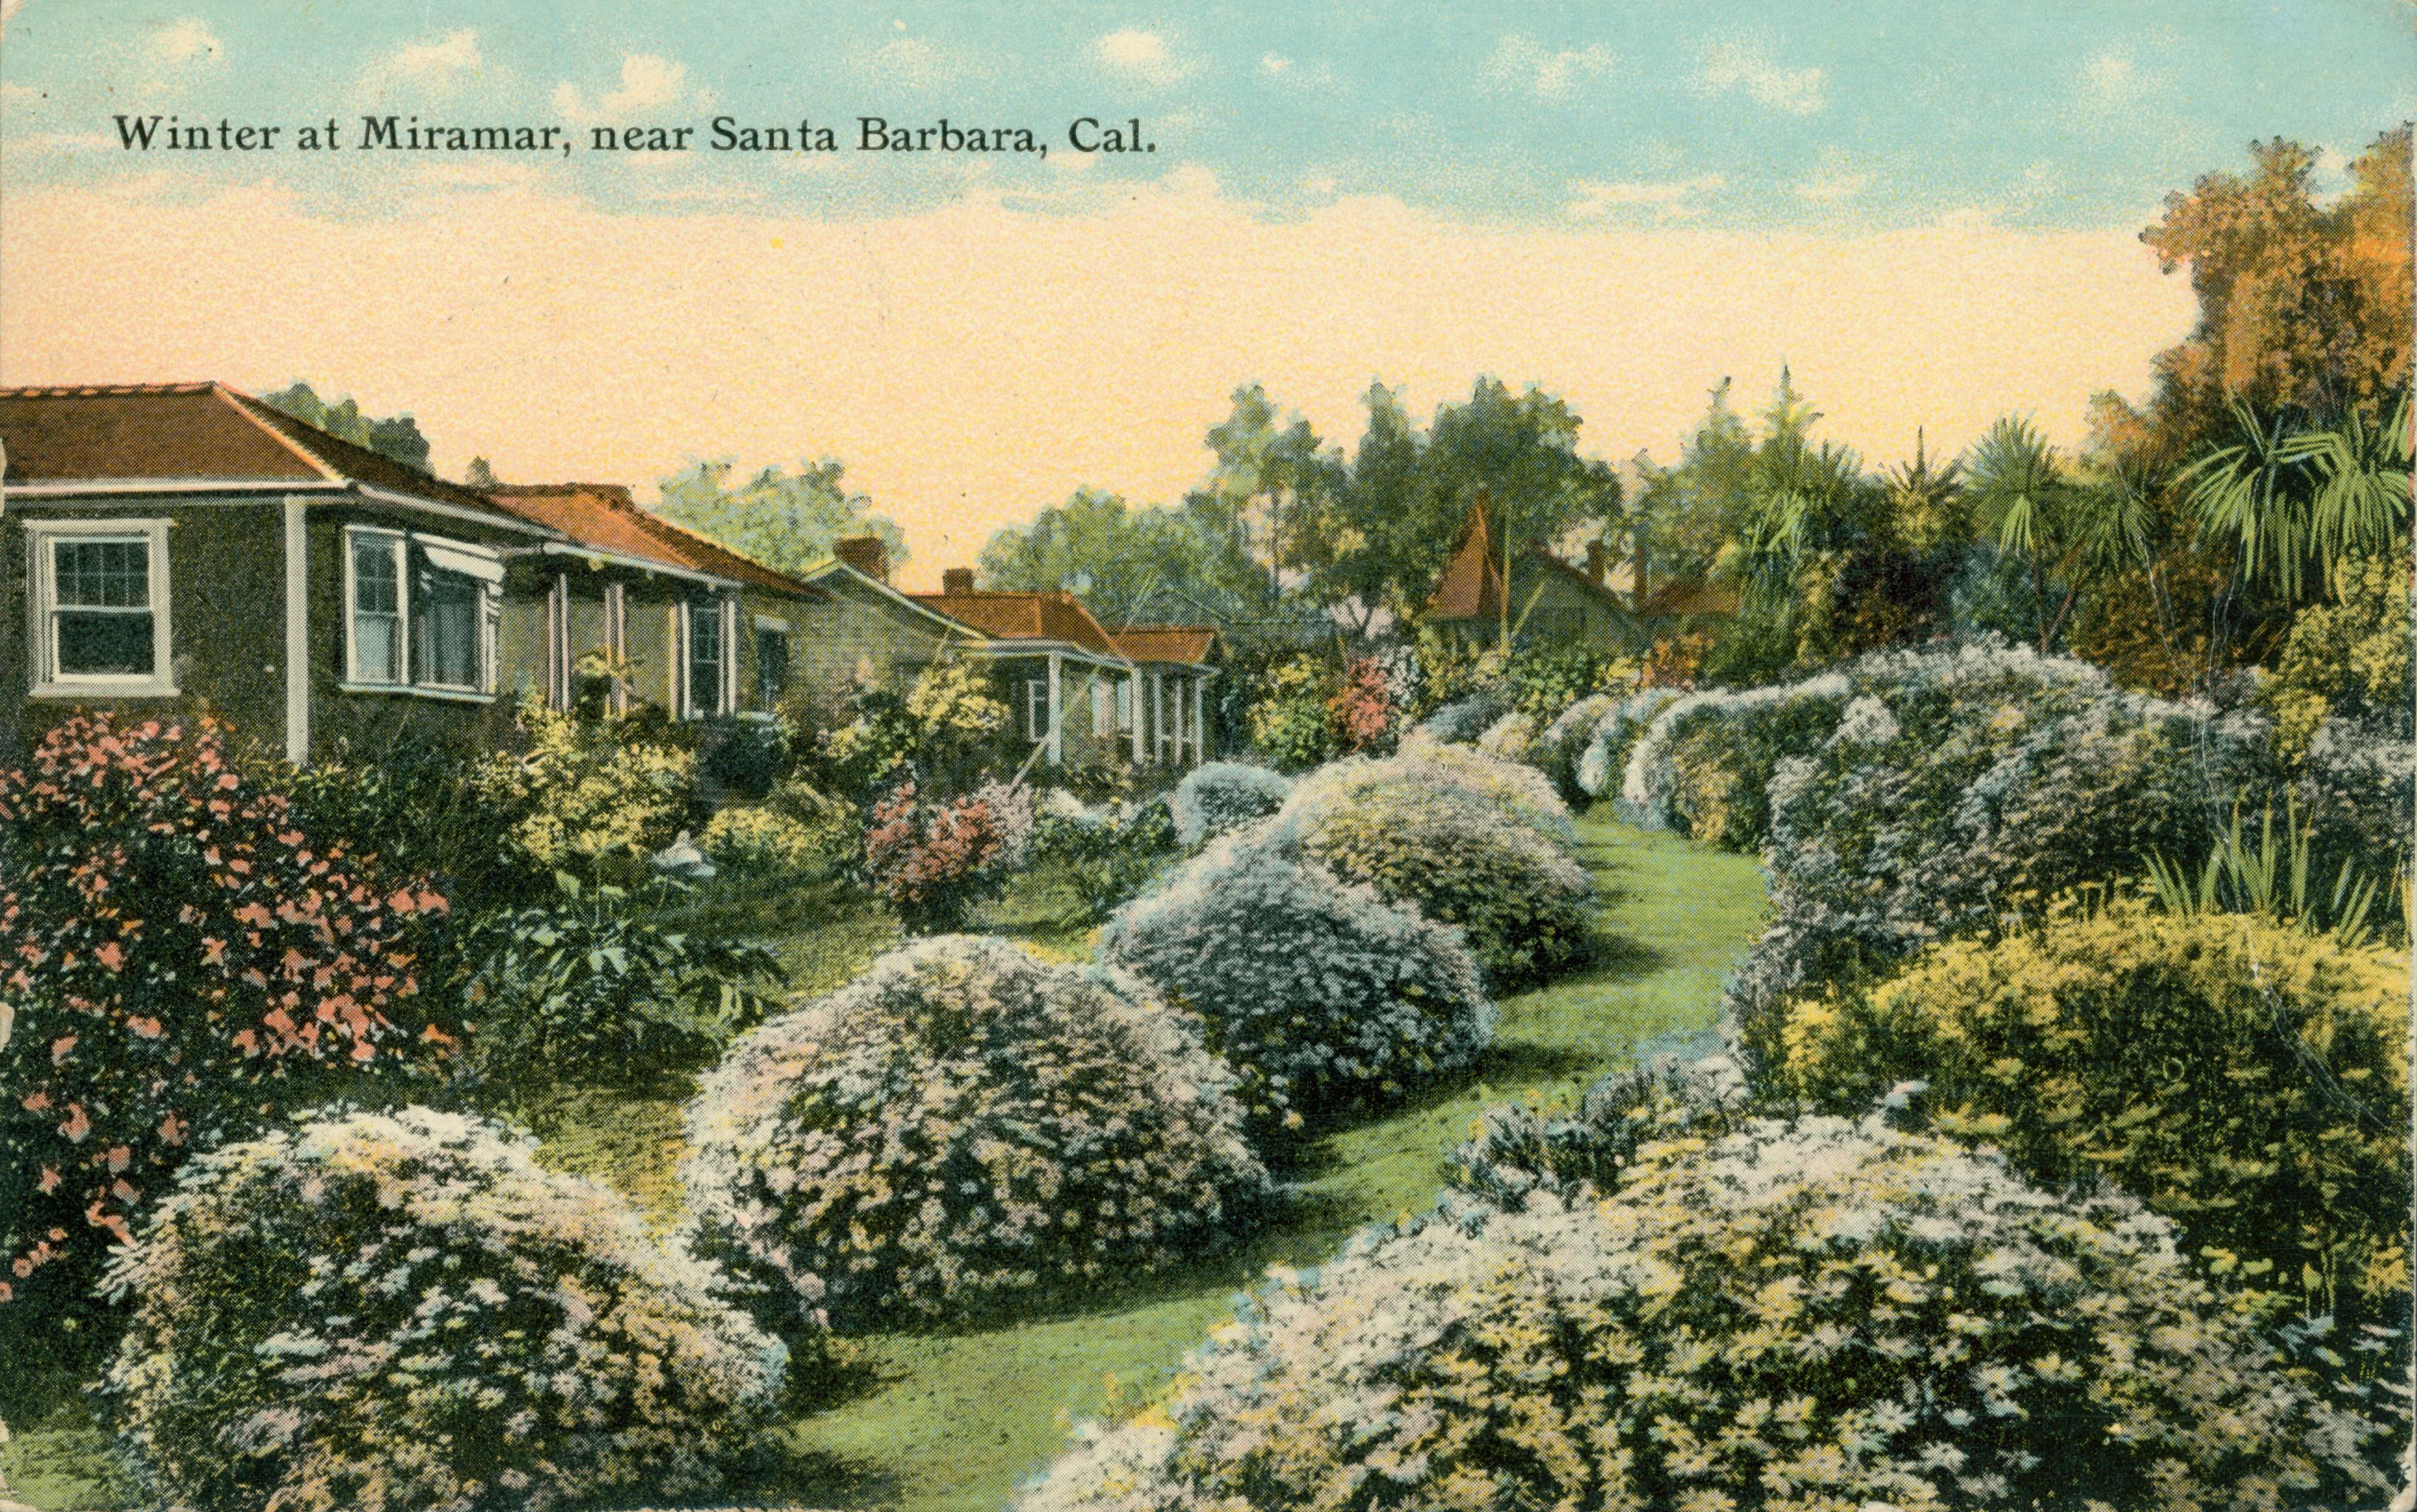 California bungalows surrounded by flowering shrubs and bushes and in the background, large trees